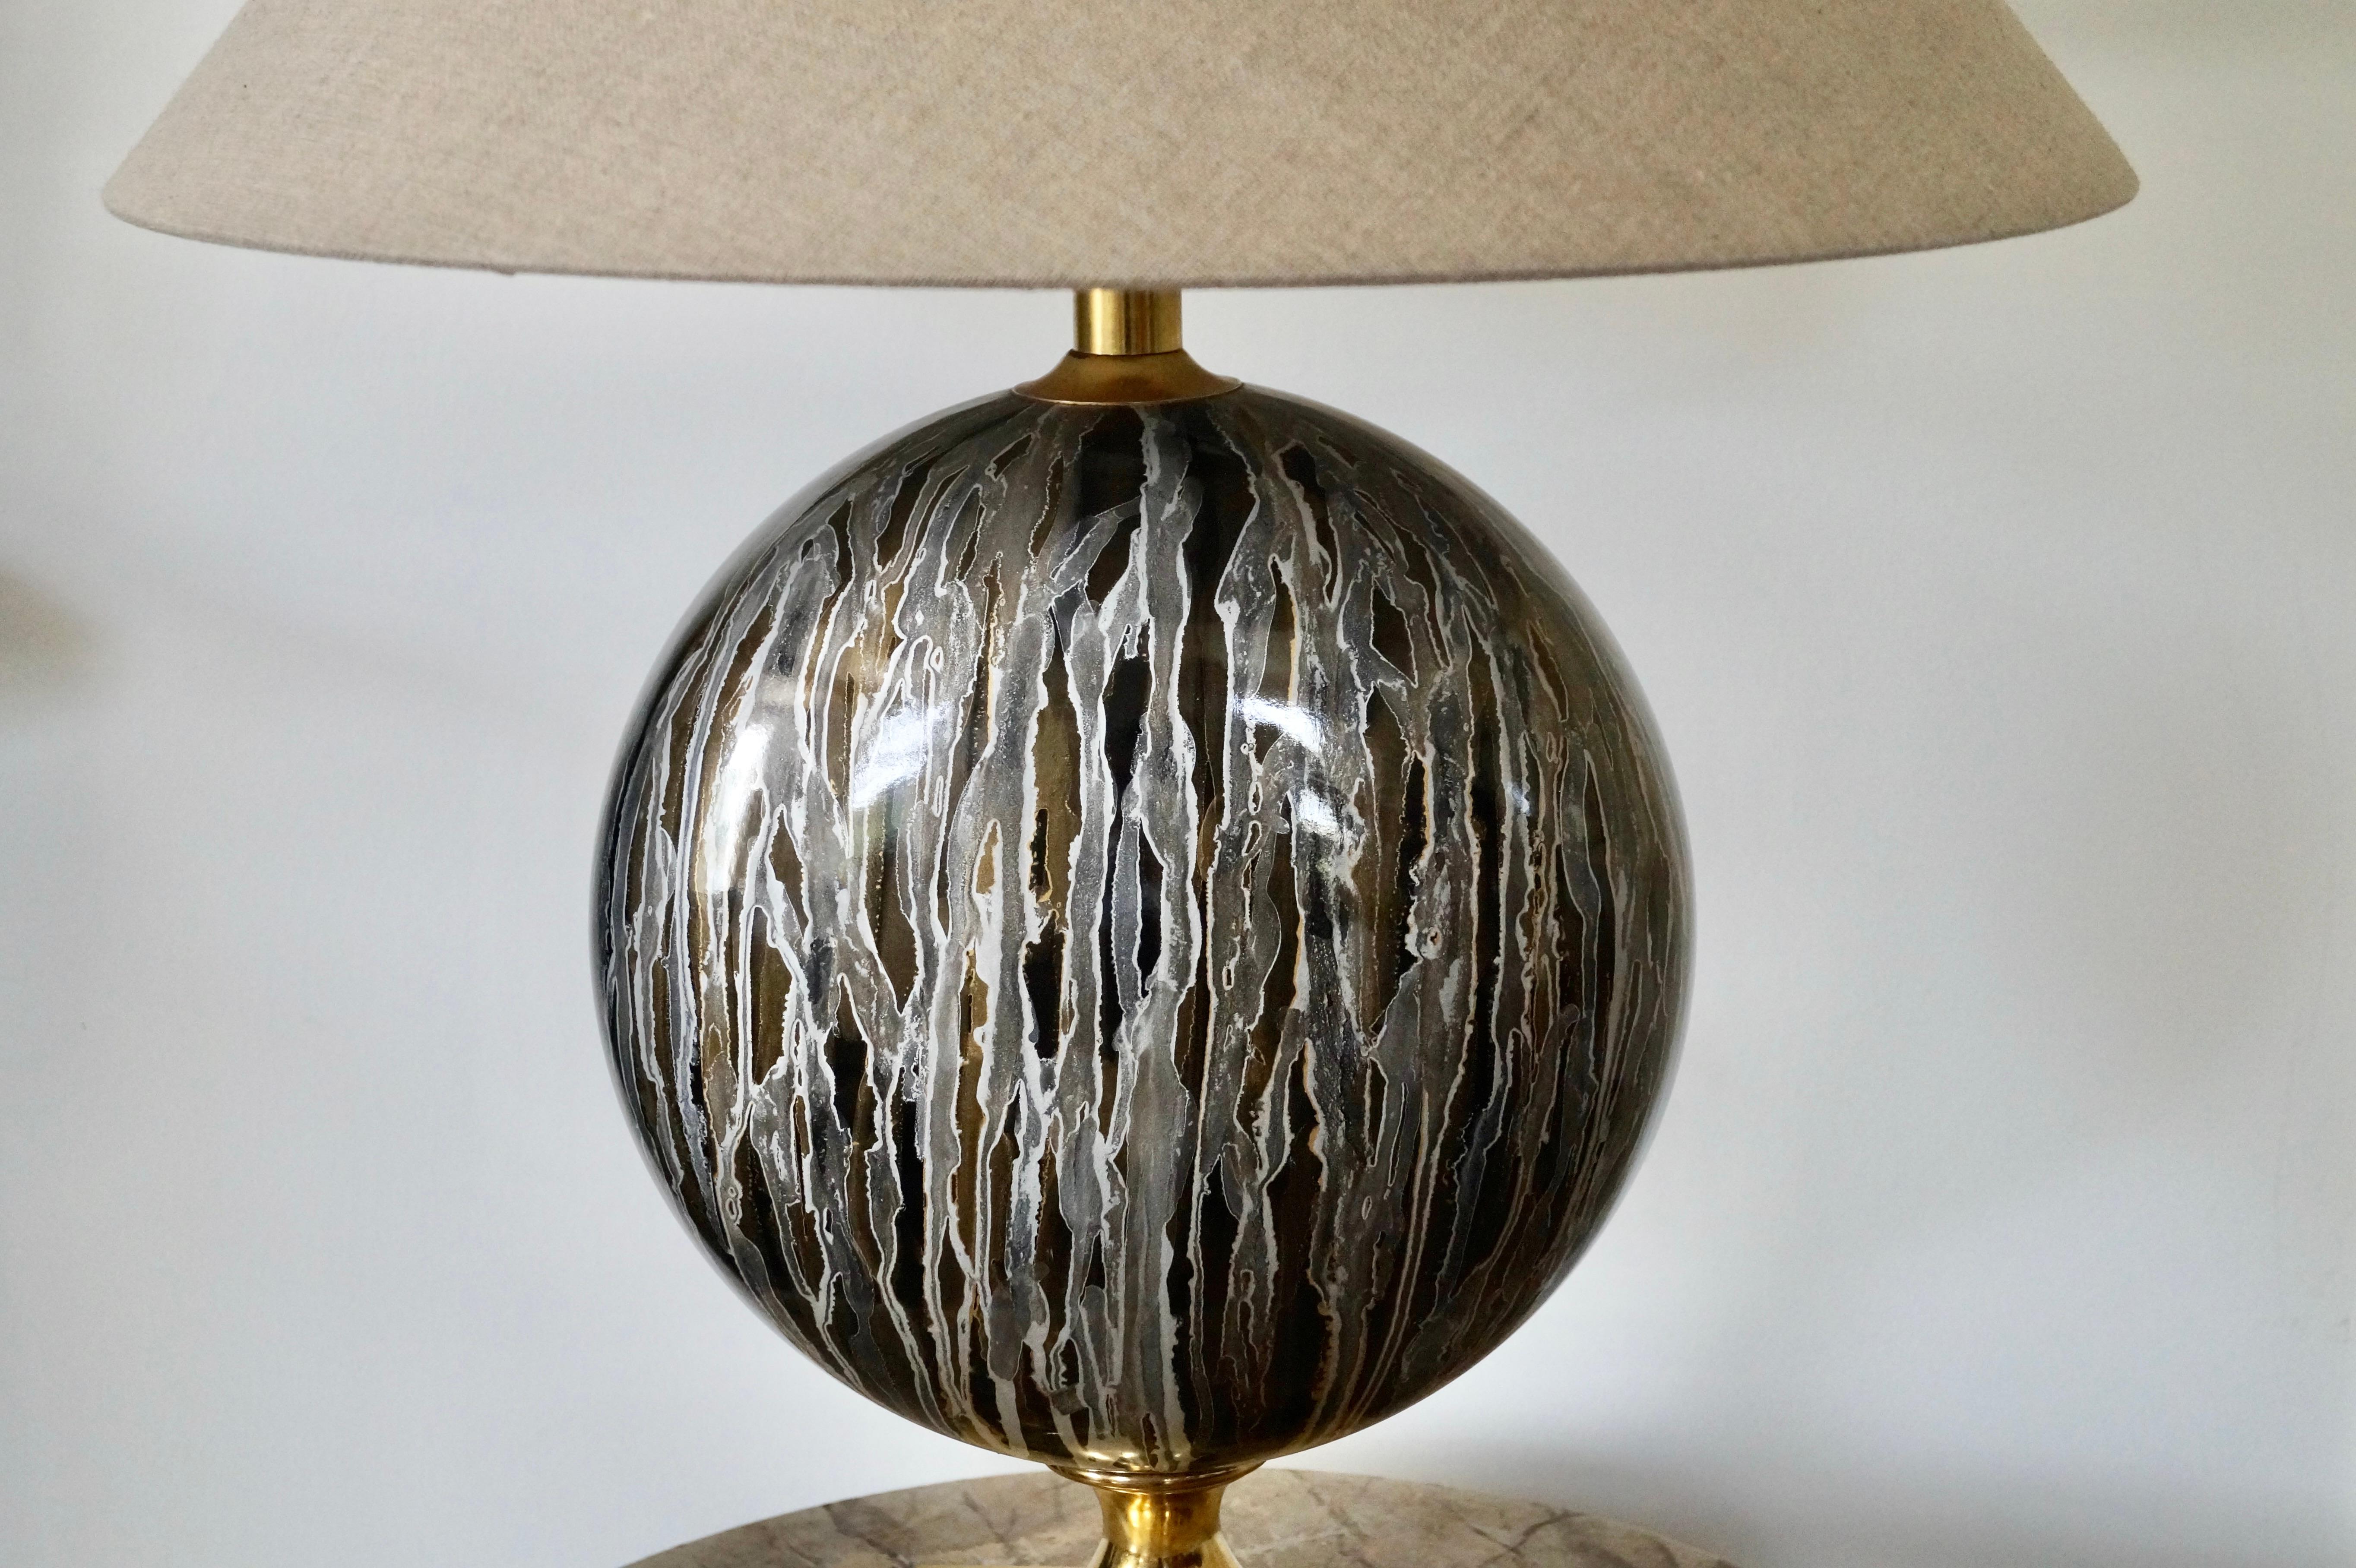 Rare and wonderfull brass and ceramic table lamp.
Design from Italy in the 1970's
Designobject and can be a real highlight in your interior.